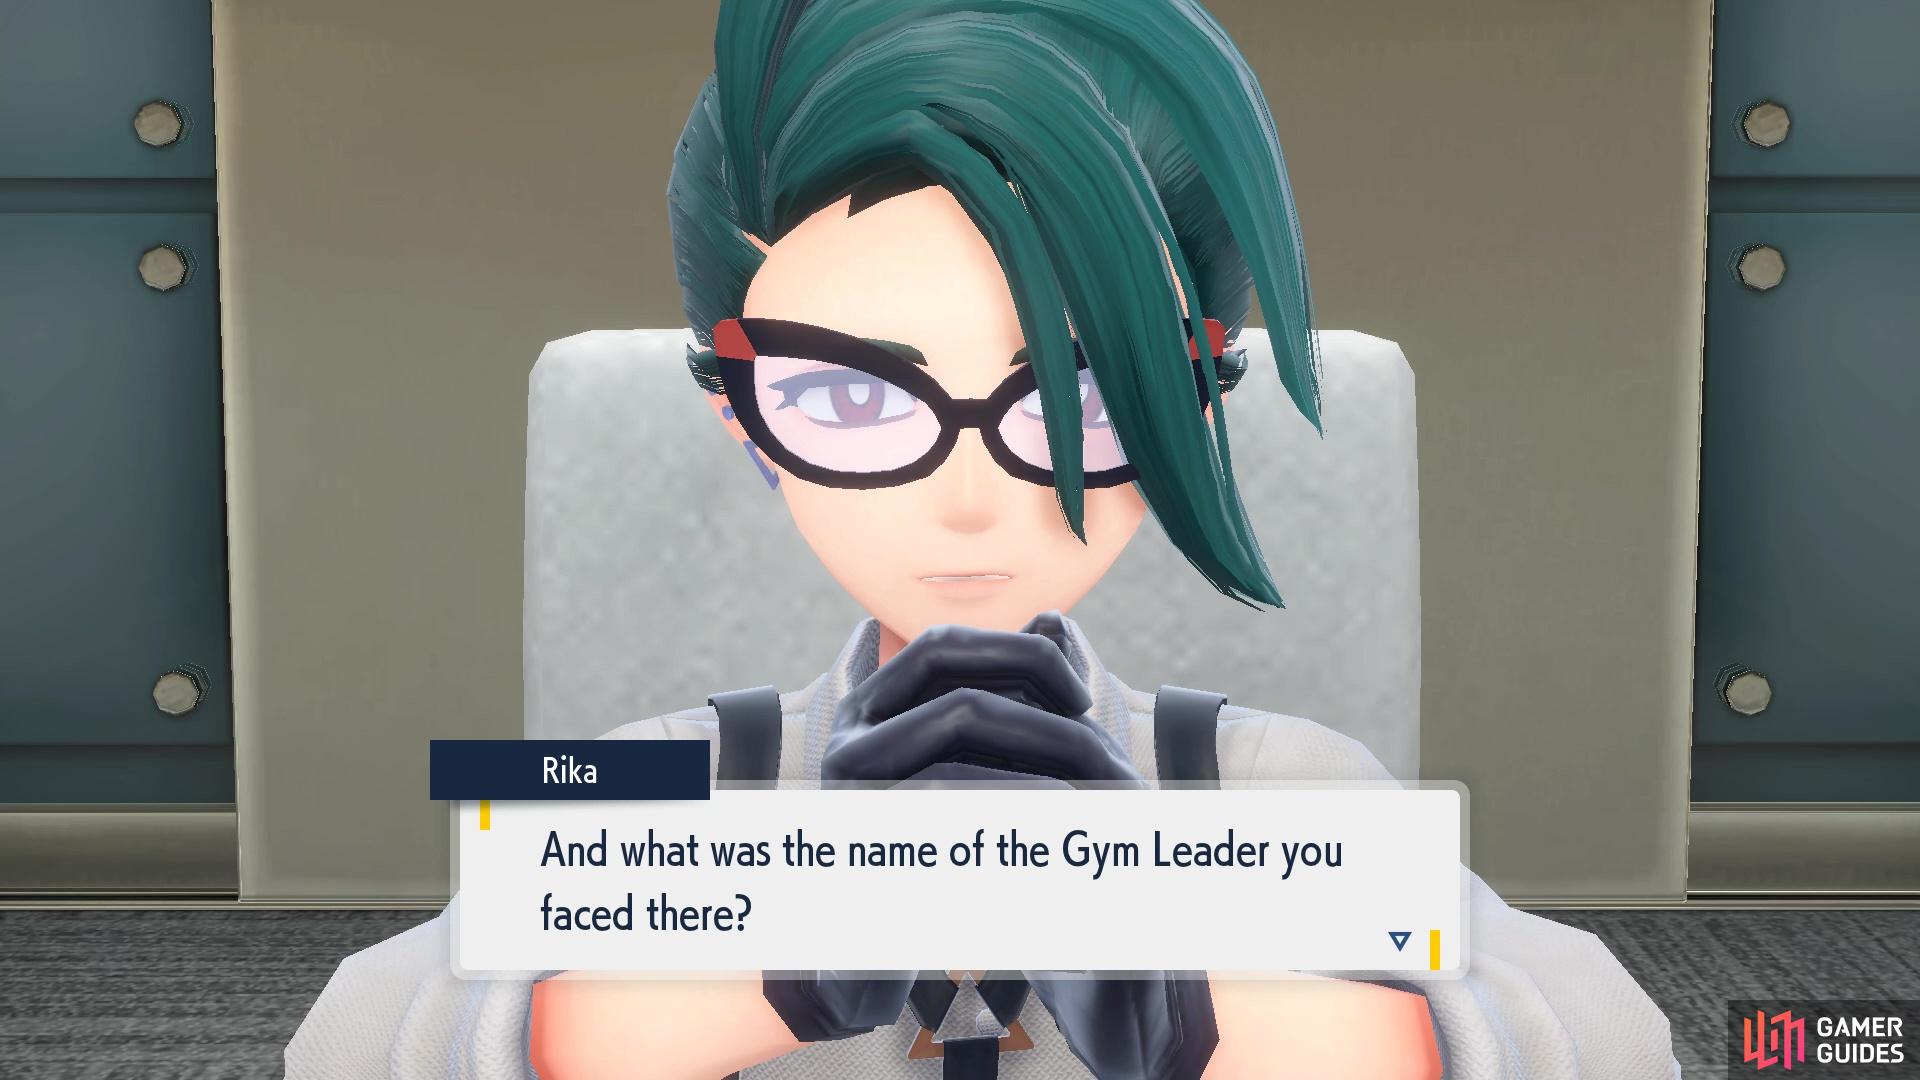 This question might catch you off guard! Do you remember which gym belongs to which leader?